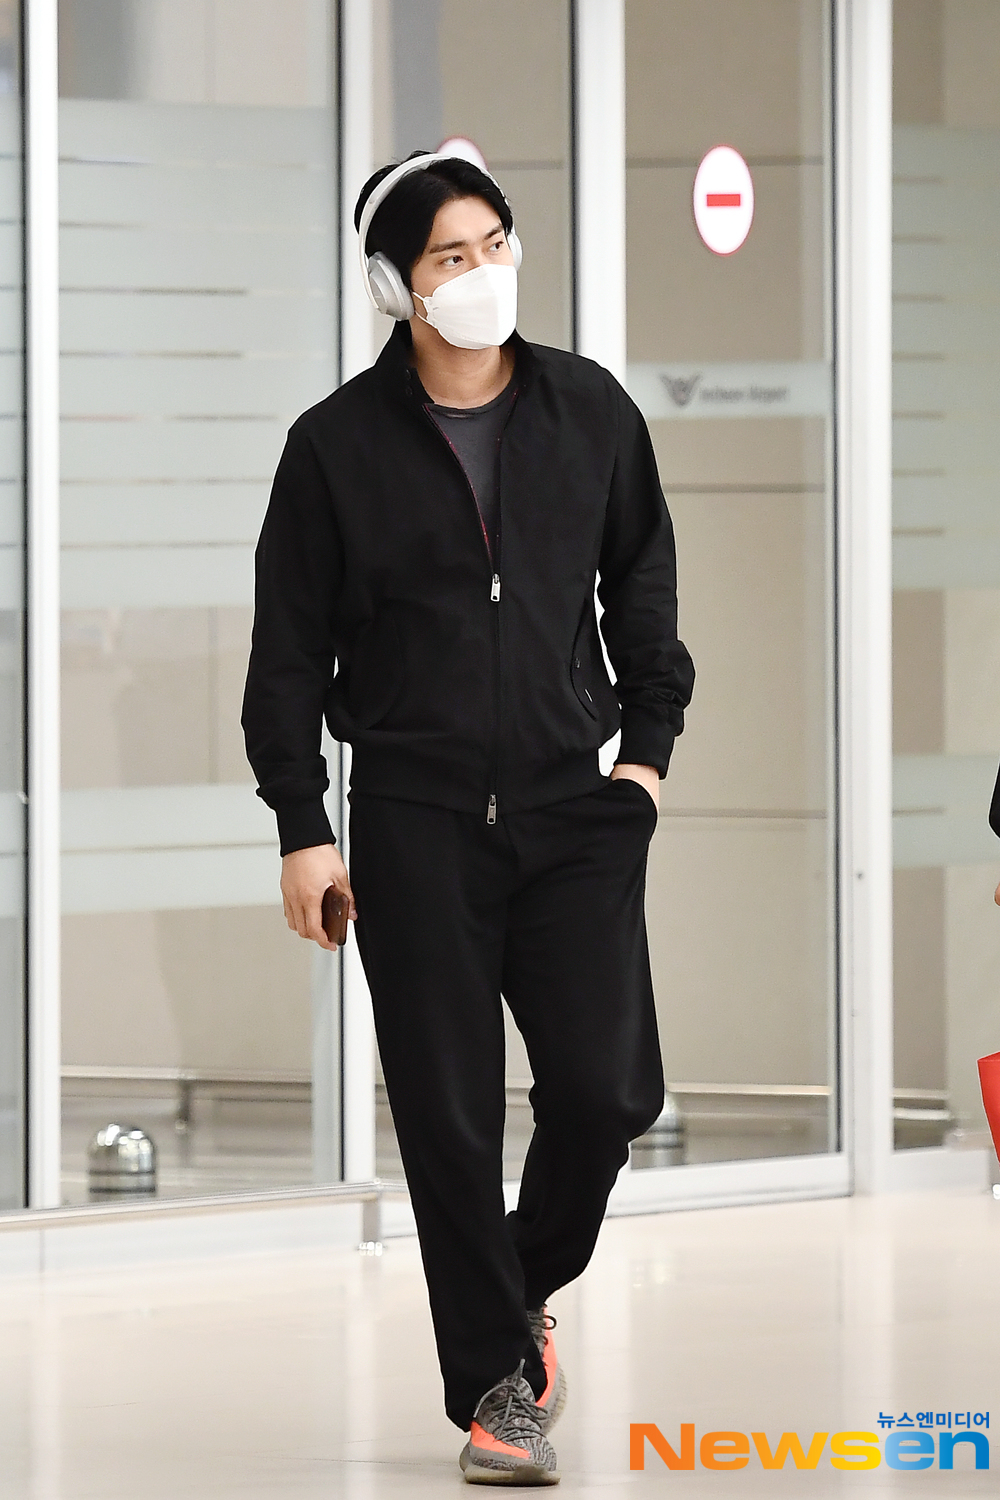 Super Junior (SUPERJUNIOR) member Choi Siwon (CHOI SI WON) arrives from Indonesia after completing a schedule in Indonesia through the Incheon International Airport in Unseo-dong, Jung District, Incheon, on March 12.exponential earthquake